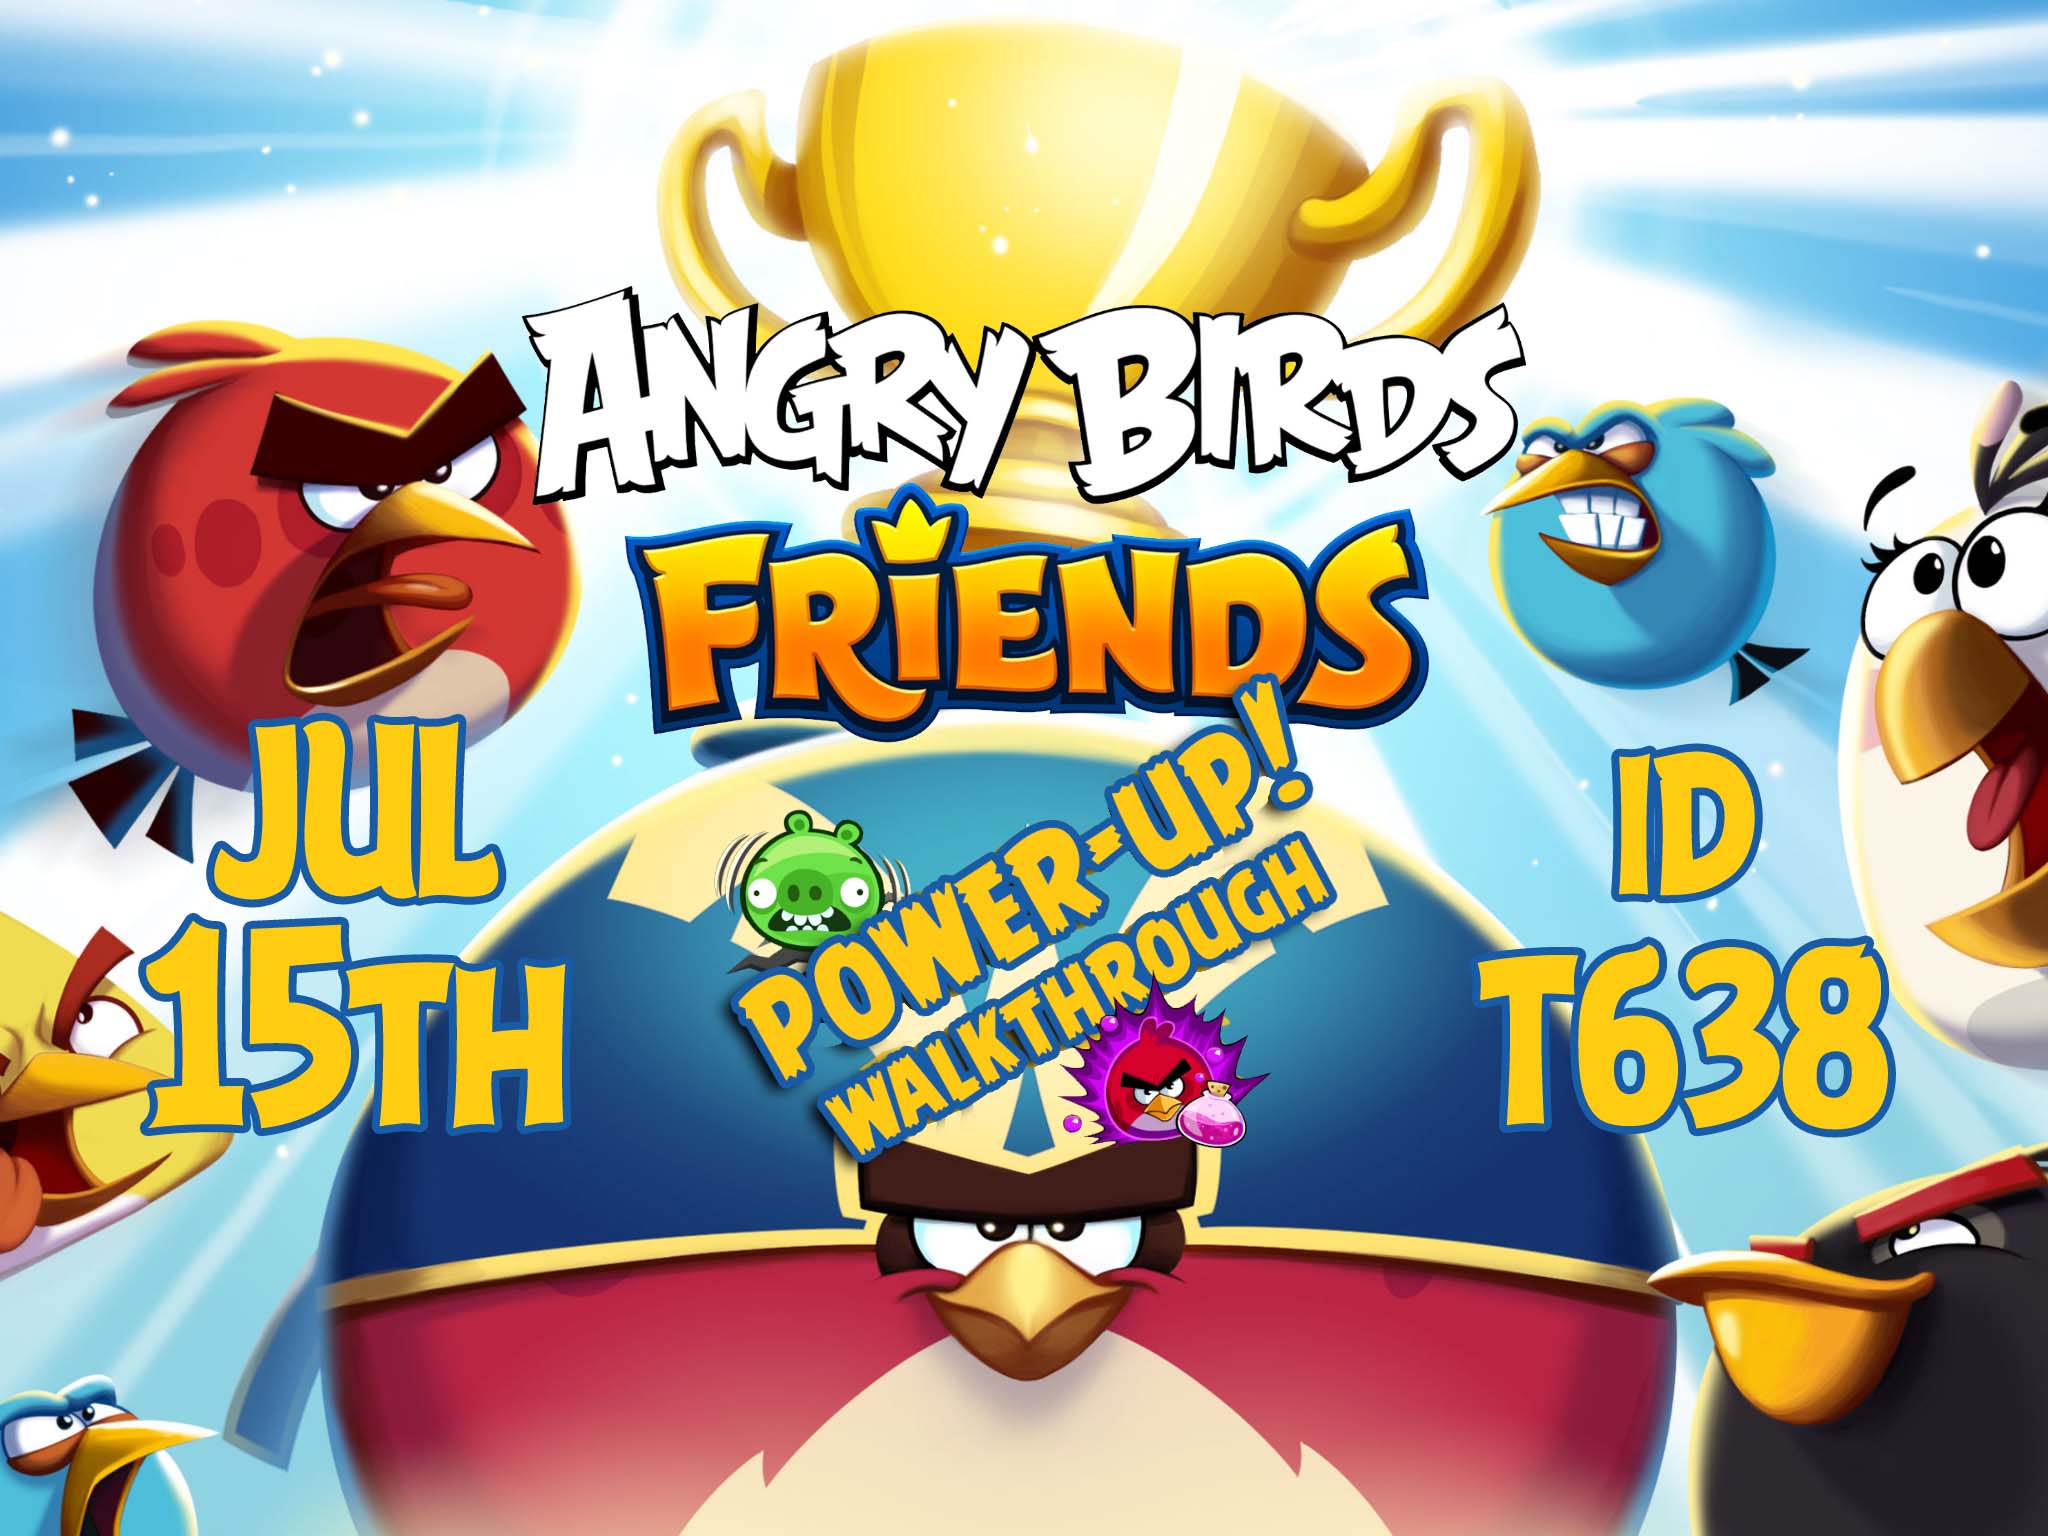 Angry-Birds-Friends-Tournament-T638-Feature-Image-PU